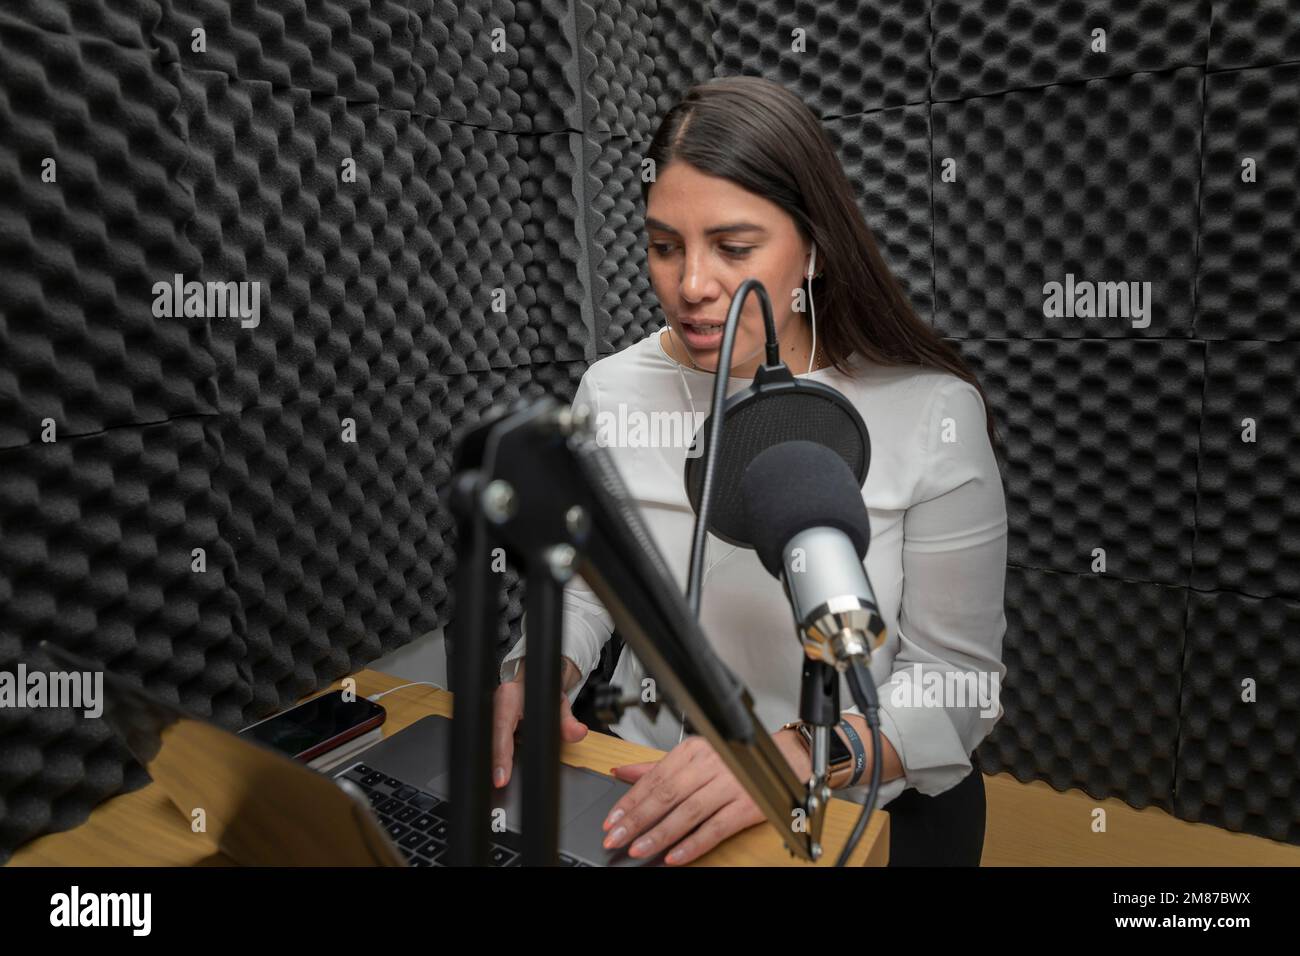 Woman speaking into a microphone in an audio booth, while recording a podcast. Stock Photo